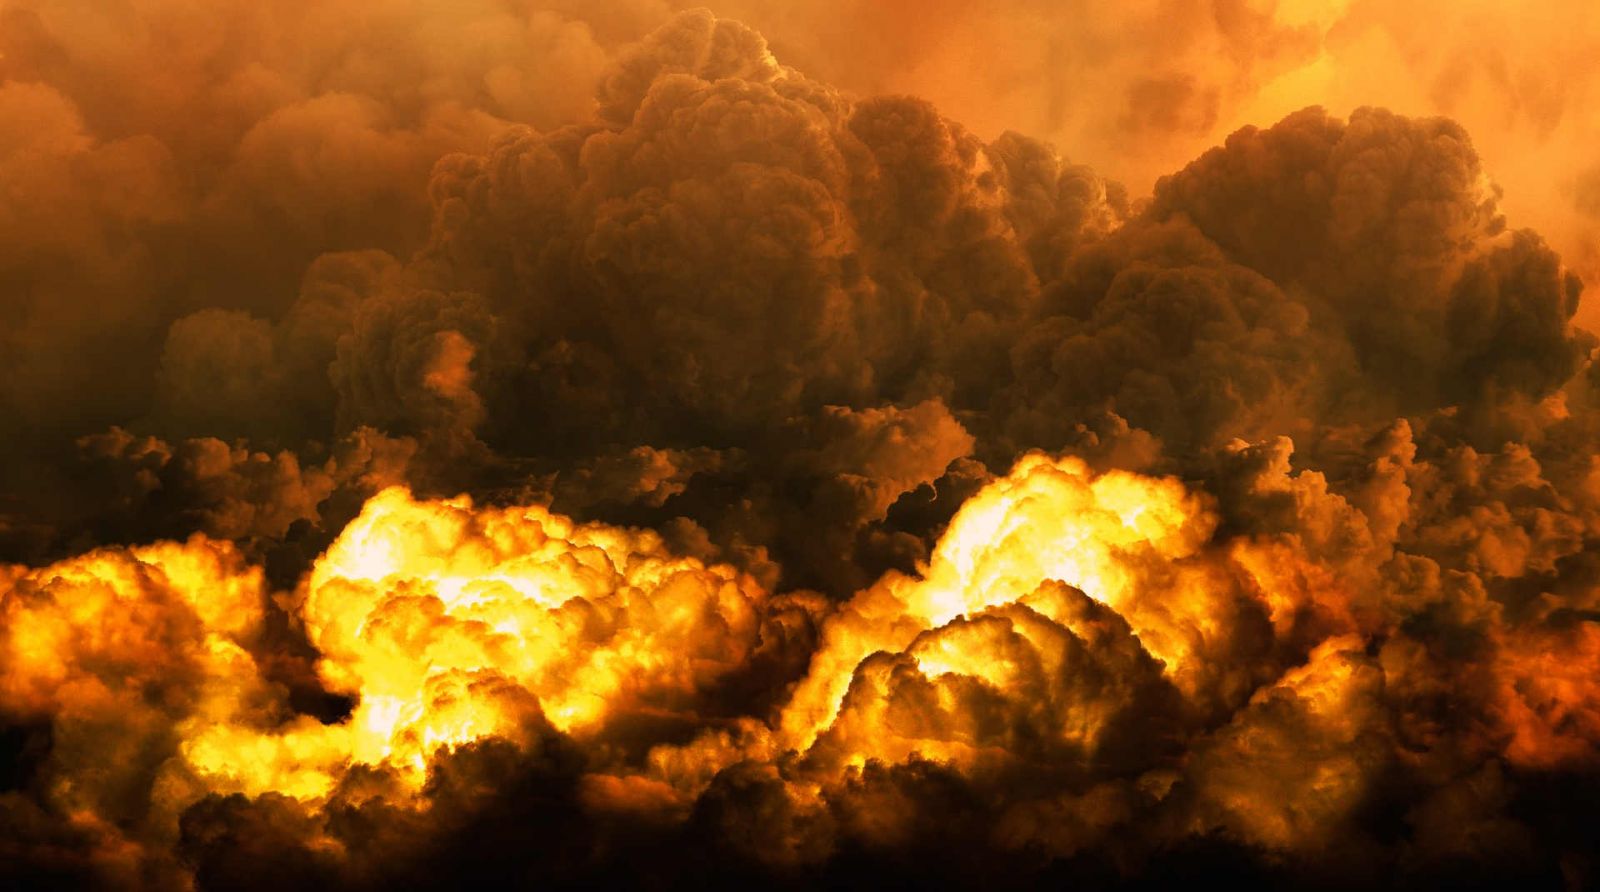 Image of an explosion representing data loss.